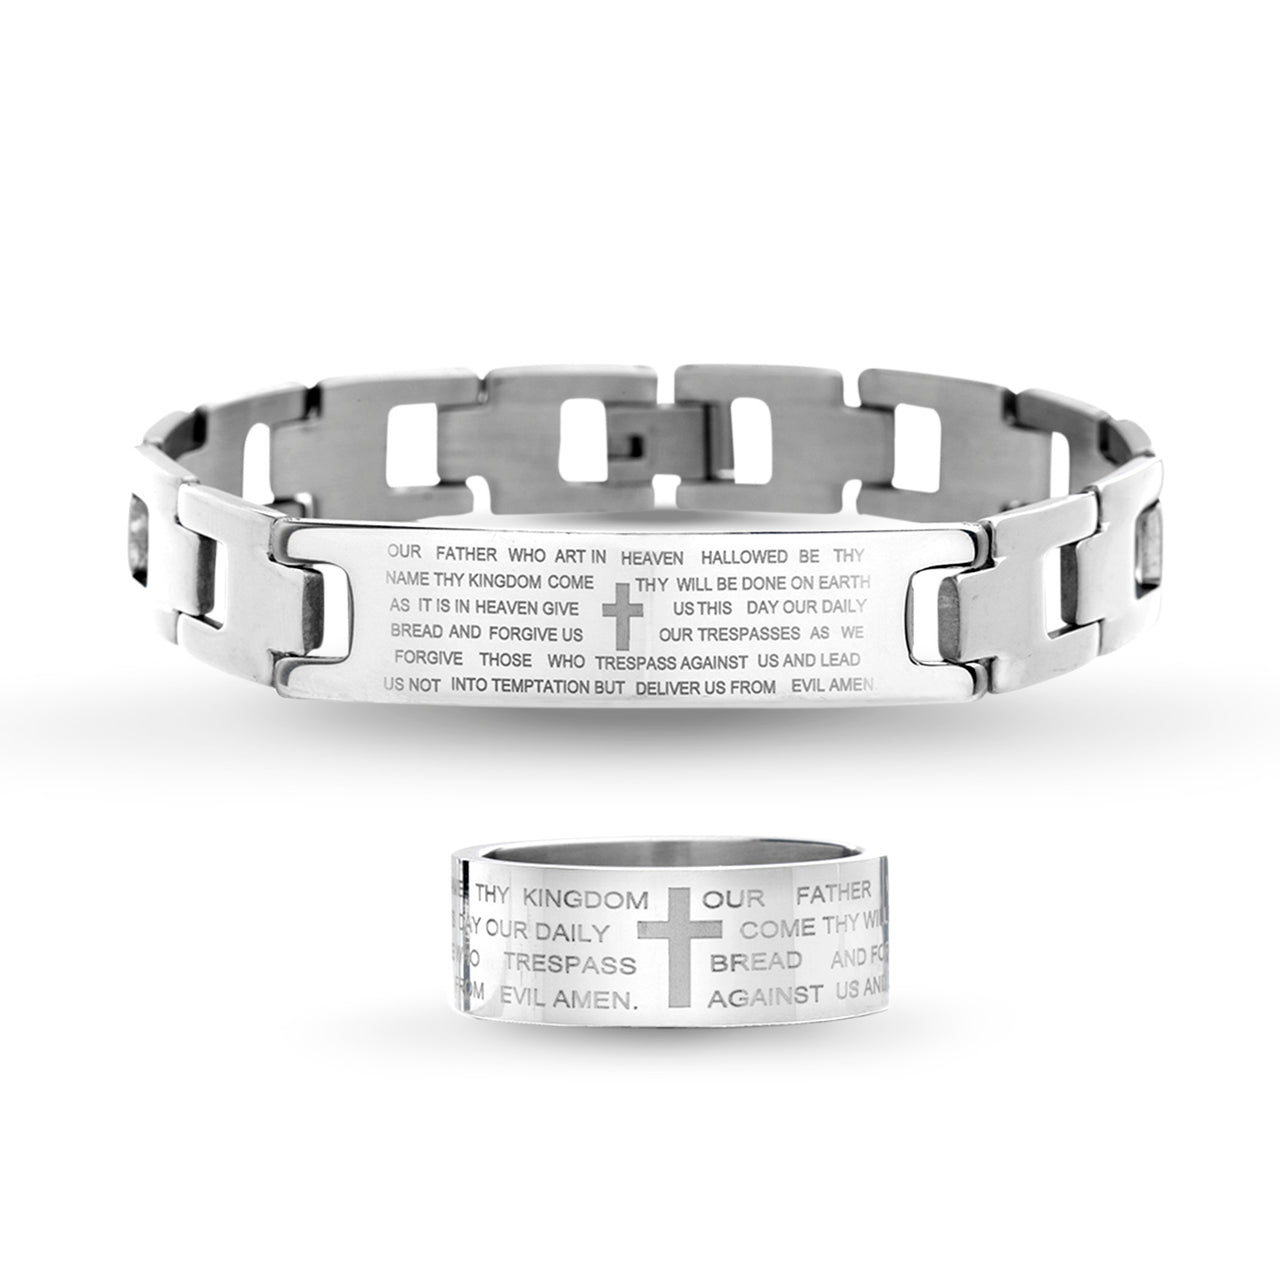 My Bible Stainless Steel ID Bracelet and Band Ring Set